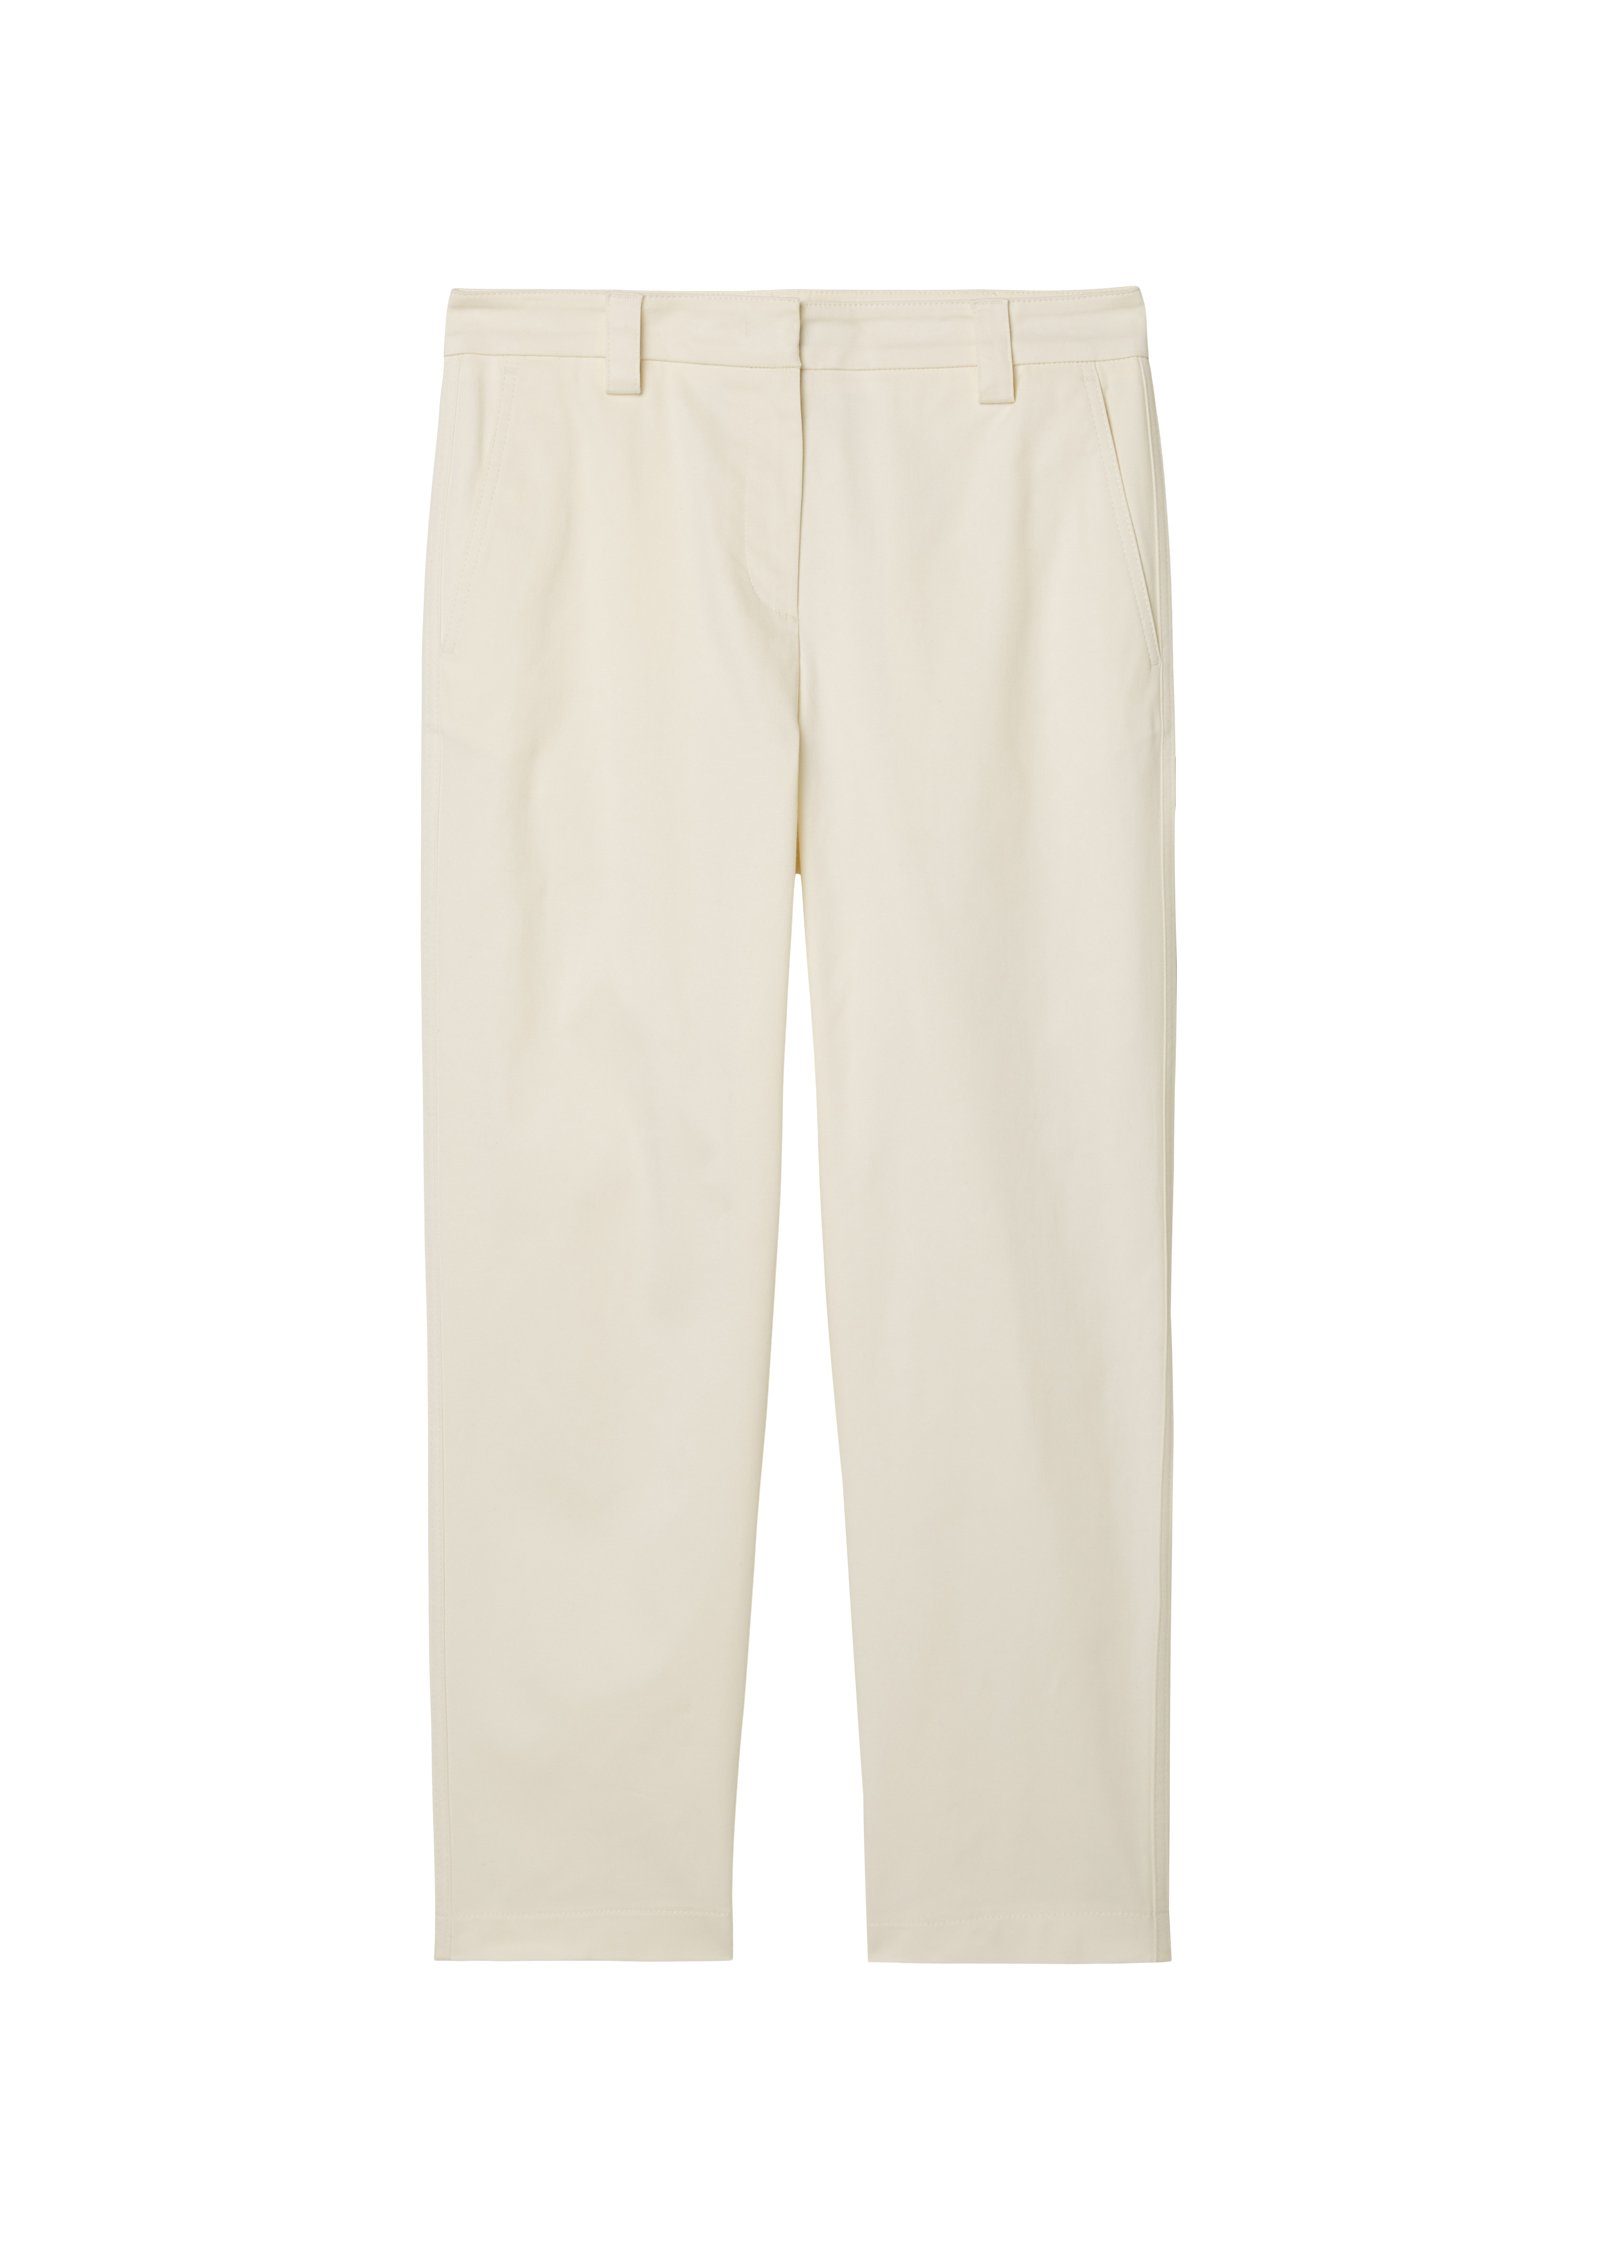 im chalky O'Polo pocket Pants, rise, sand Marc leg, modernen modern tapered Chino-Style high style, chino 7/8-Hose welt